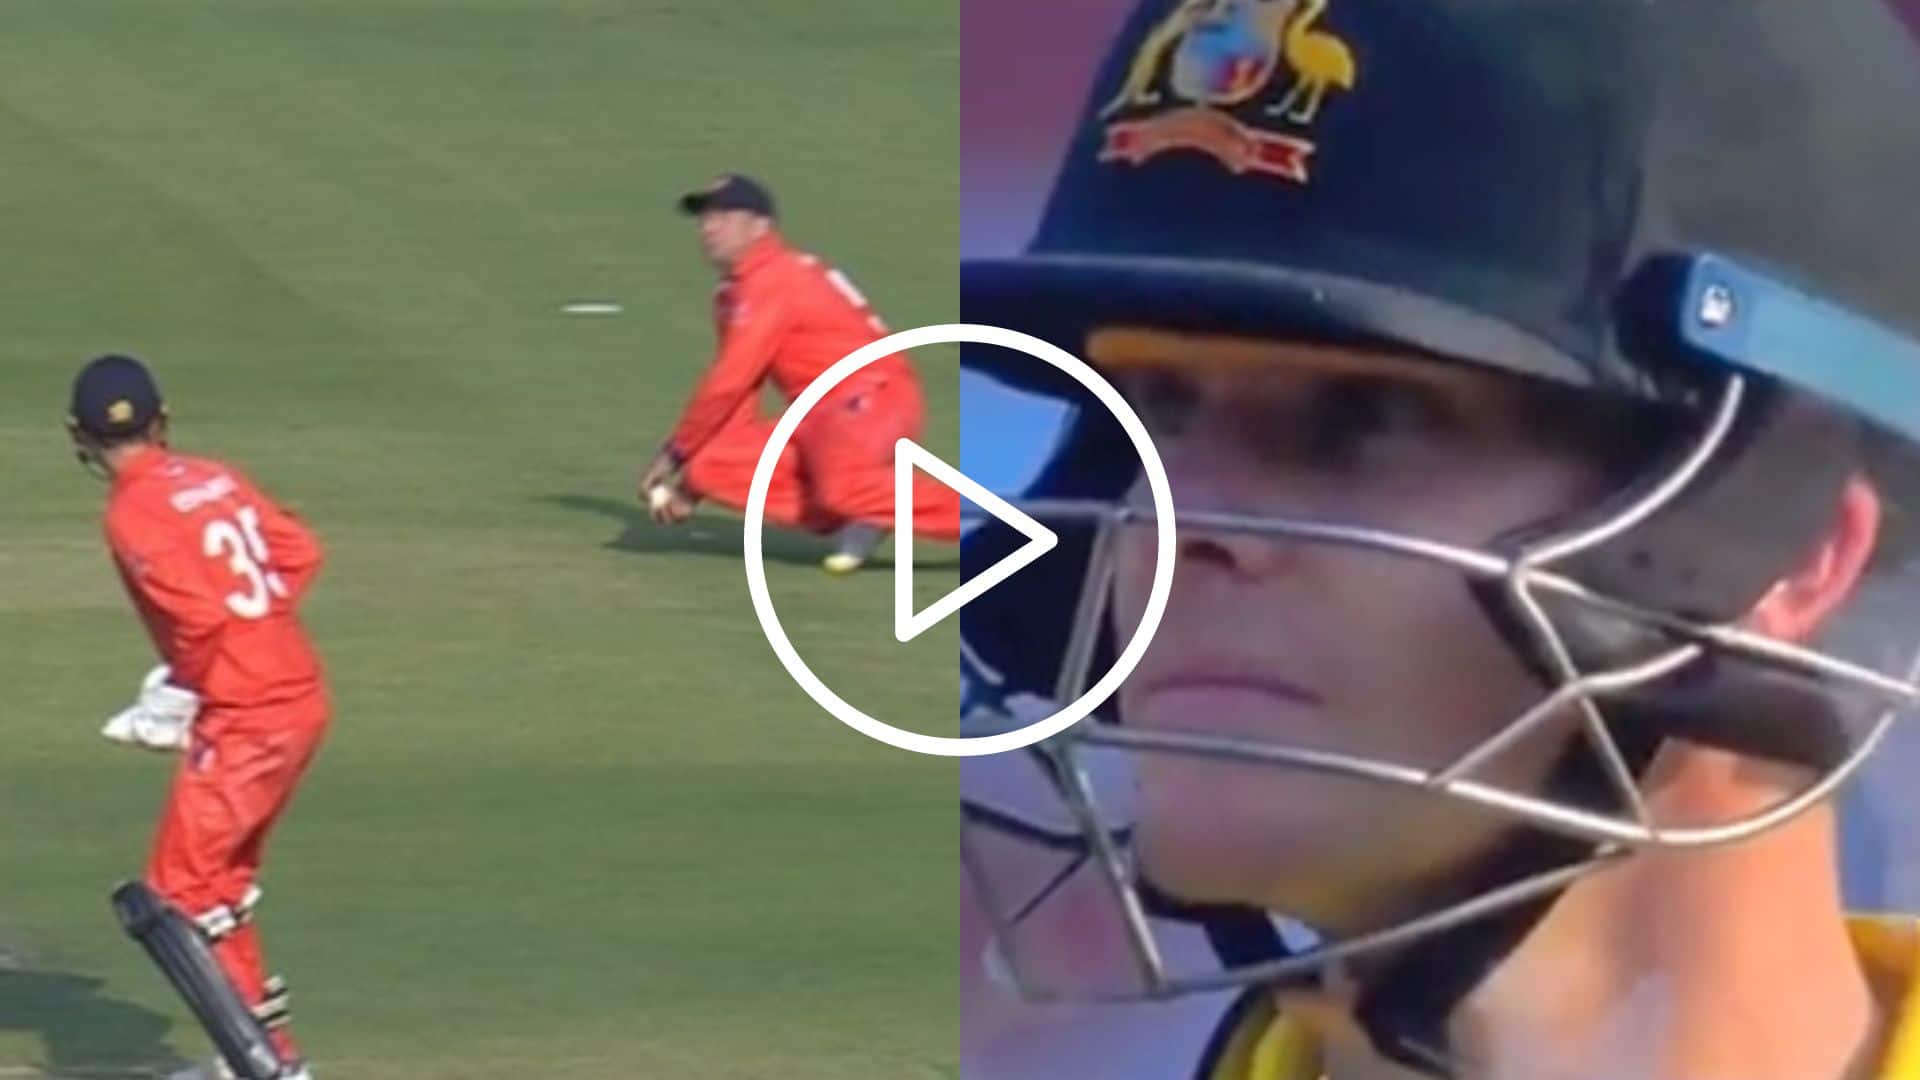 [Watch] Steve Smith ‘Hilariously’ Waits For Umpires’ Final Call Despite Clear Cut Catch